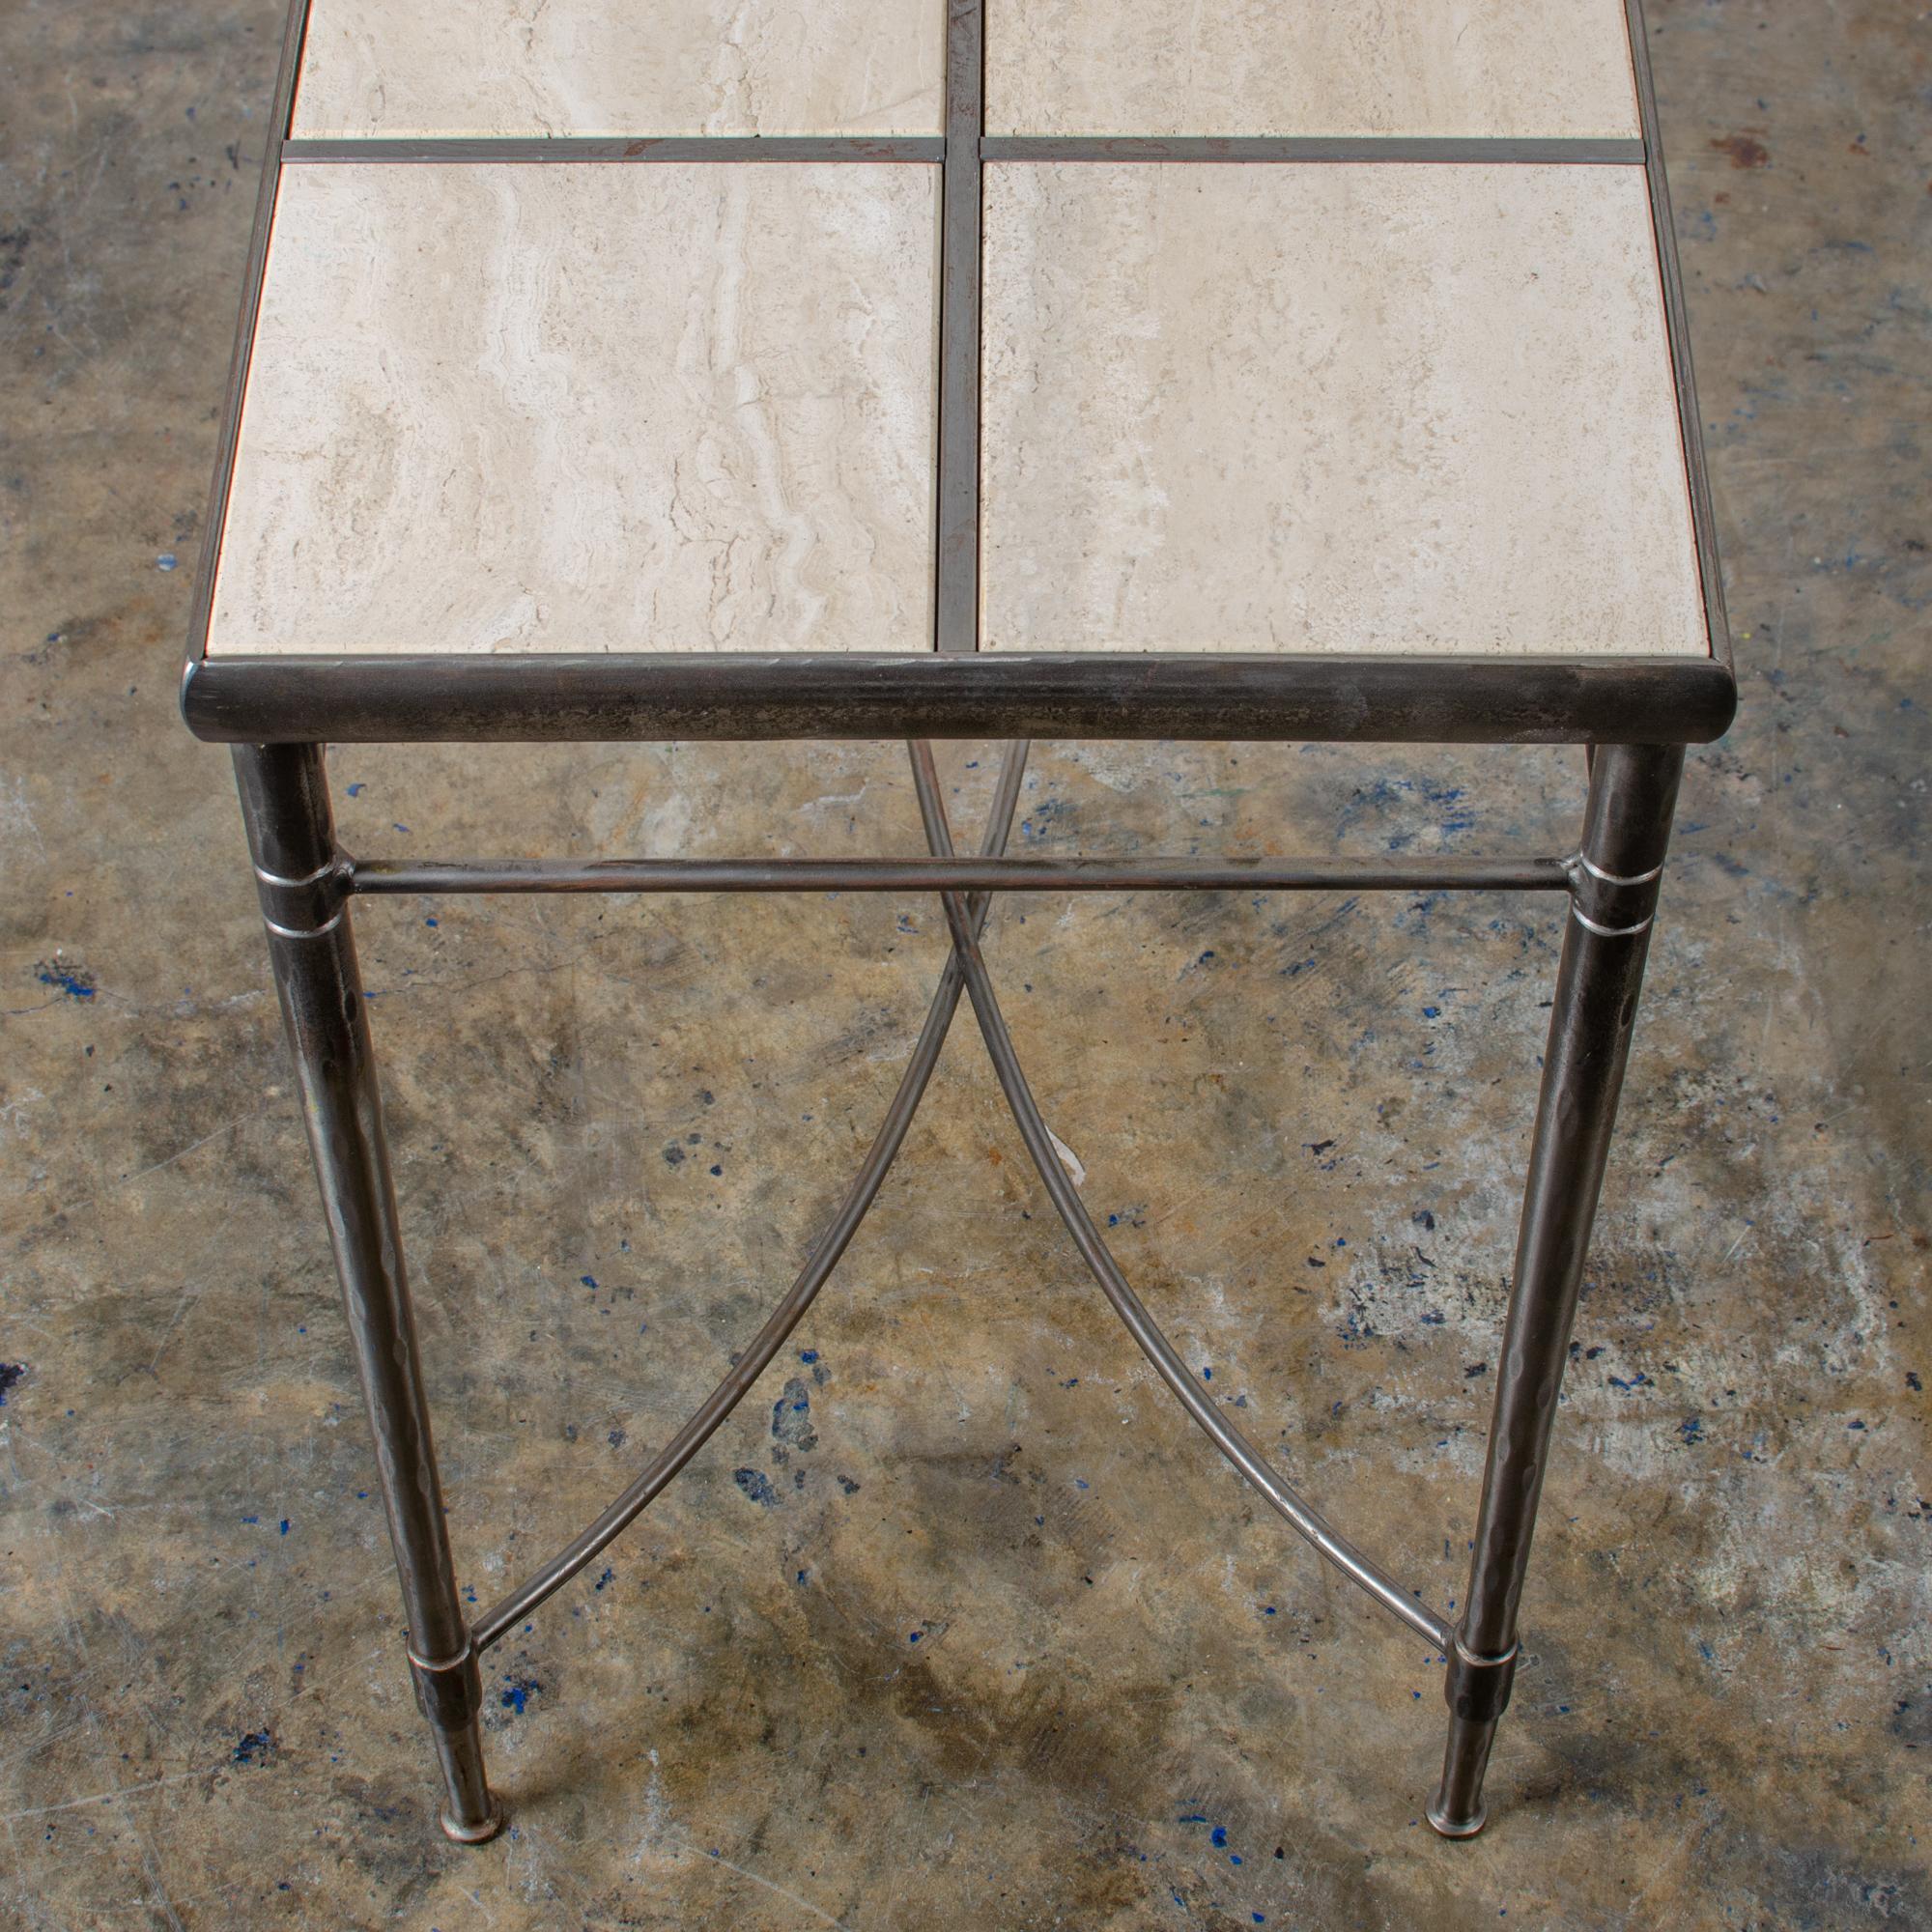 Italian Iron and Travertine Tile Console Table Regular price For Sale 6